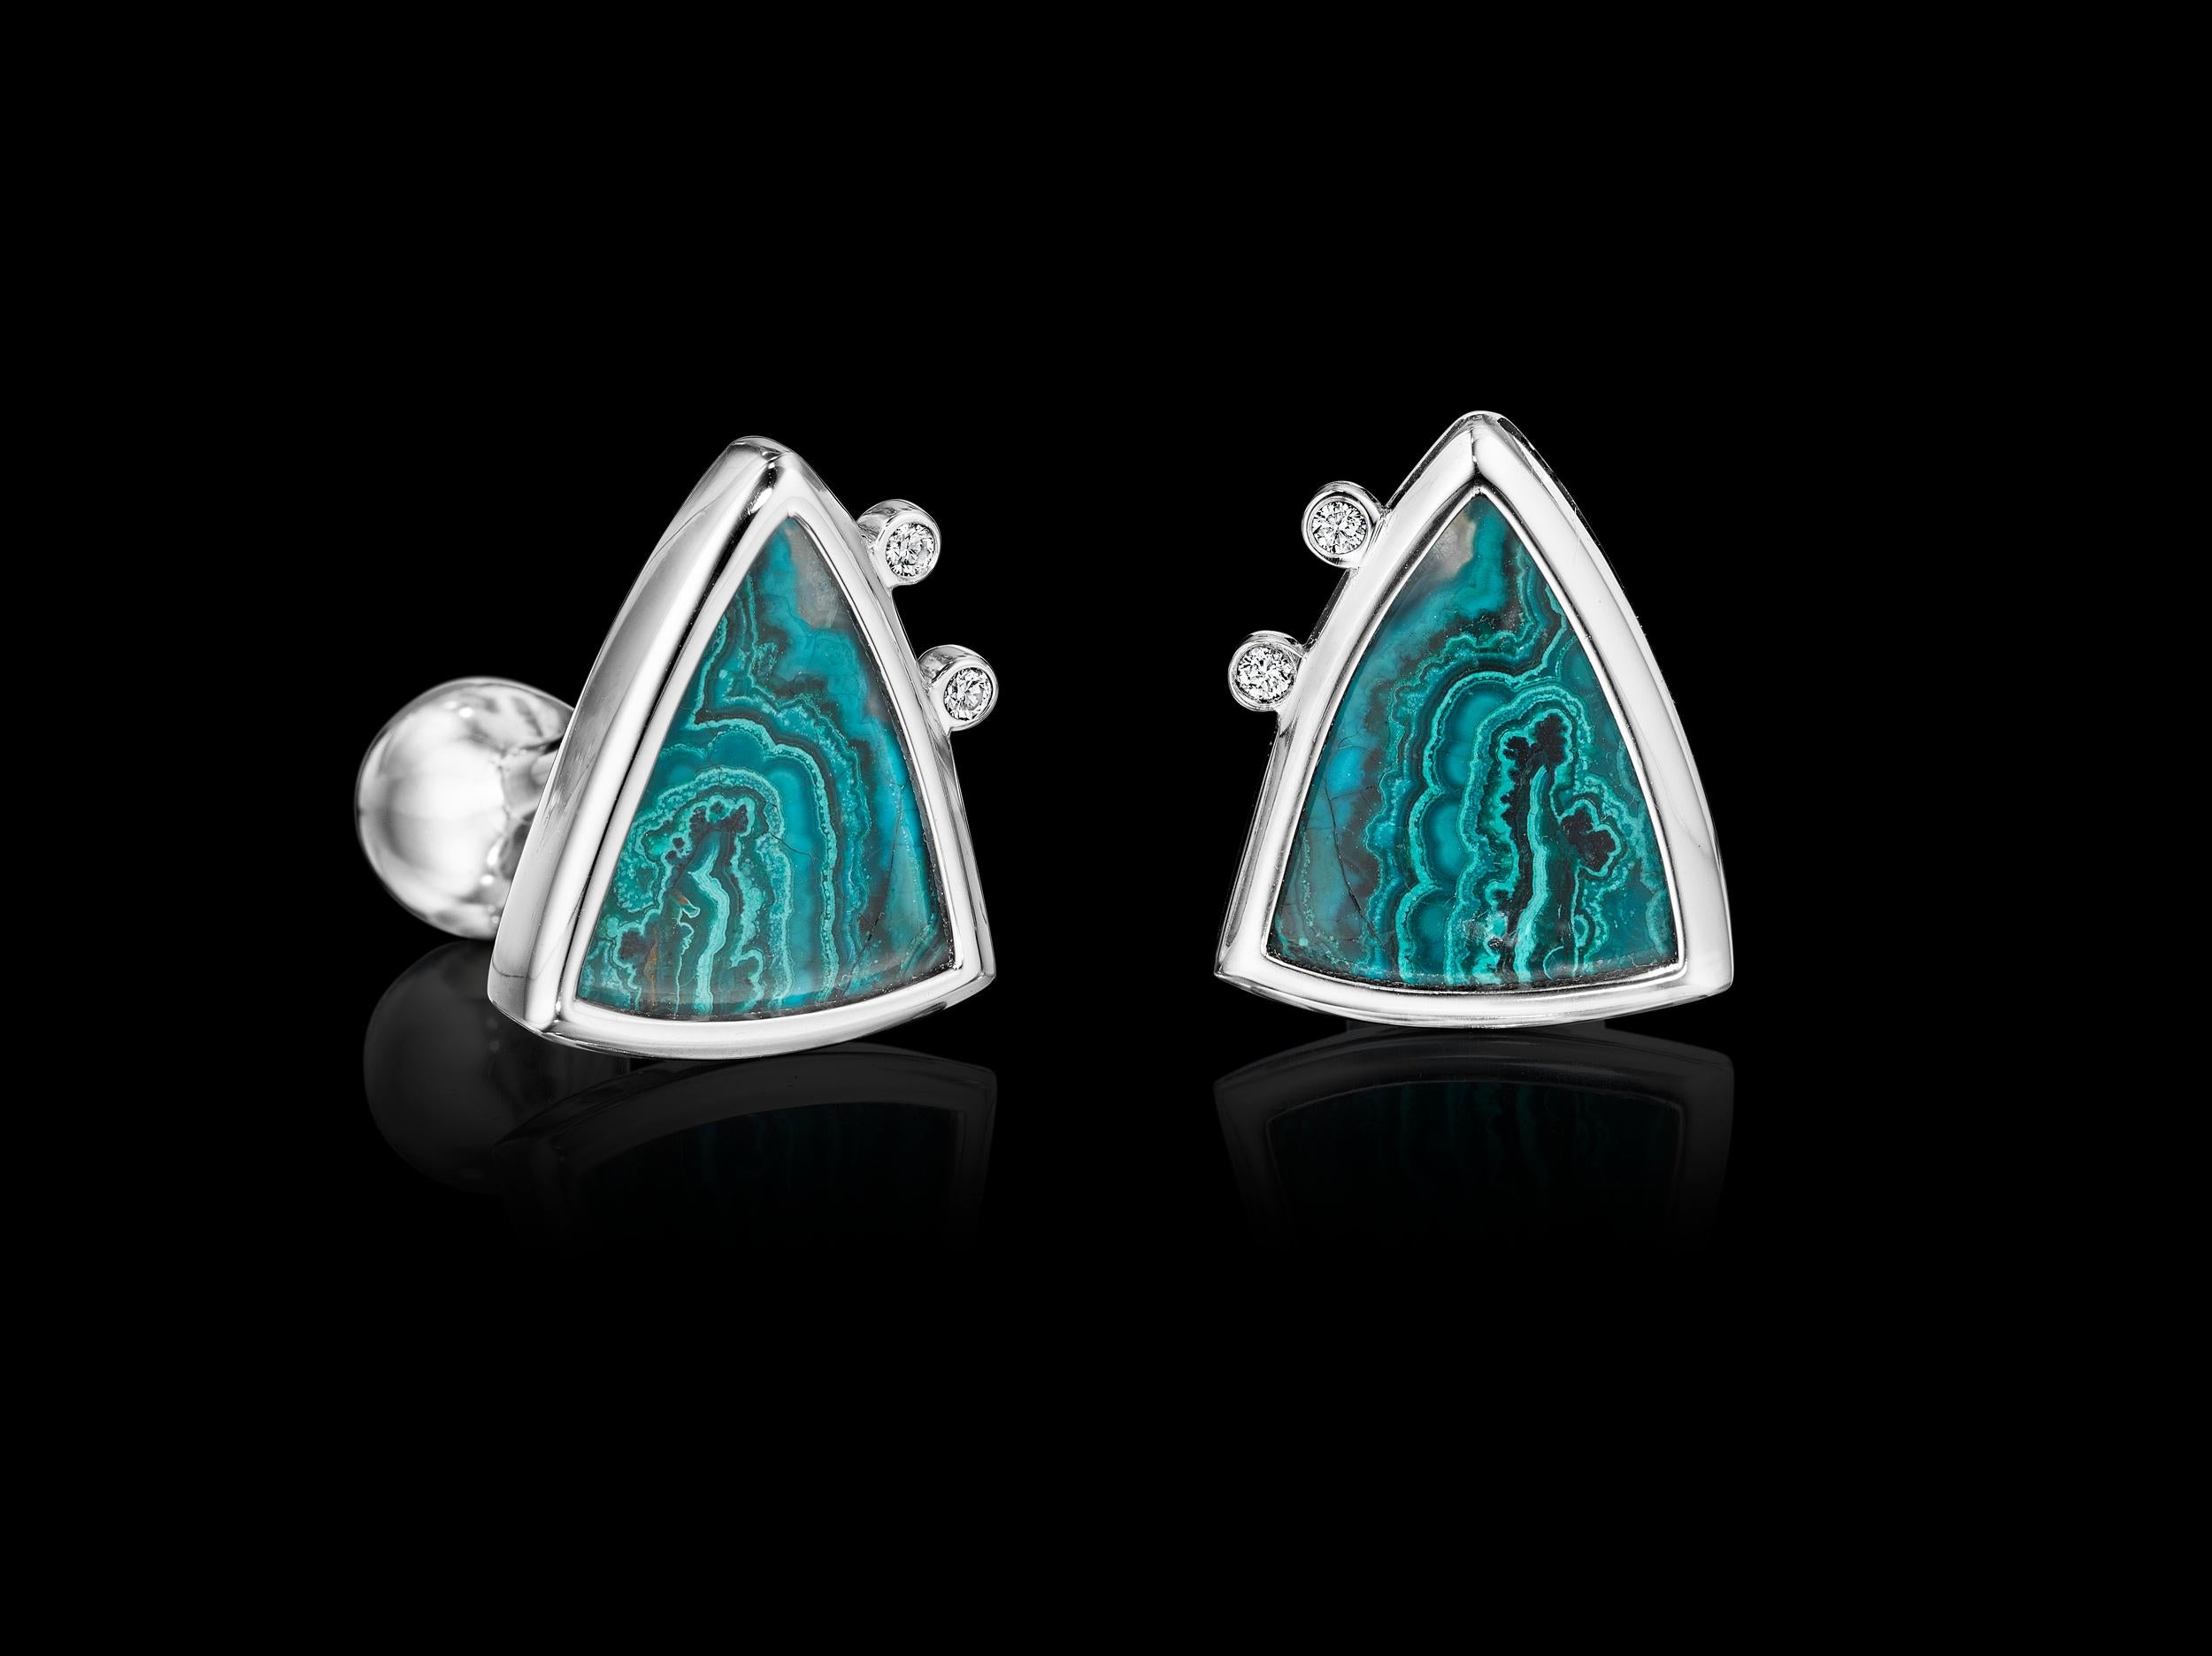 One-of-a-kind Platinum Cufflinks YOKI design, features Diamond (0.1cts. approx.) and Azurite Malachite (27.5cts approx.) set in Platinum. 

Dimensions: 2.1mm face length x 1.7mm face width (approximately)

Style: Cufflinks: Ball return back

This